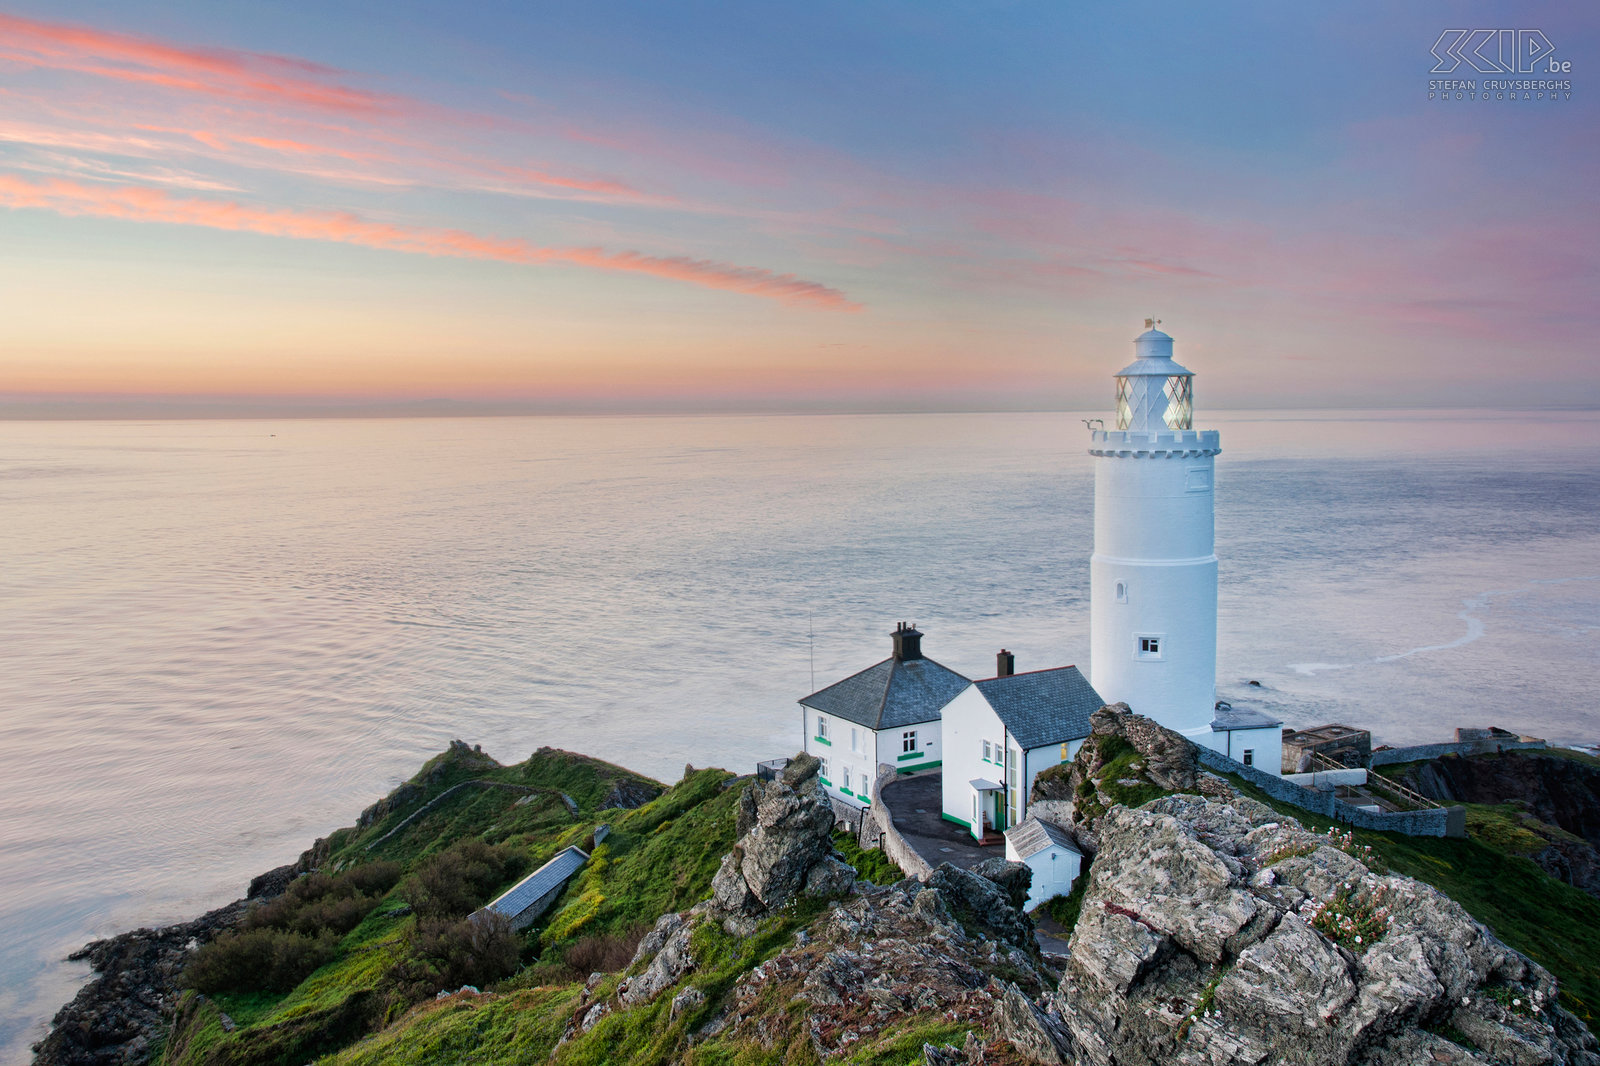 Sunrise at Start Point Lighthouse Start Point is one of the most exposed peninsulas on the English Coast in south Devon. There is a beautiful white lighthouse in gothic style which was built in 1836. Stefan Cruysberghs